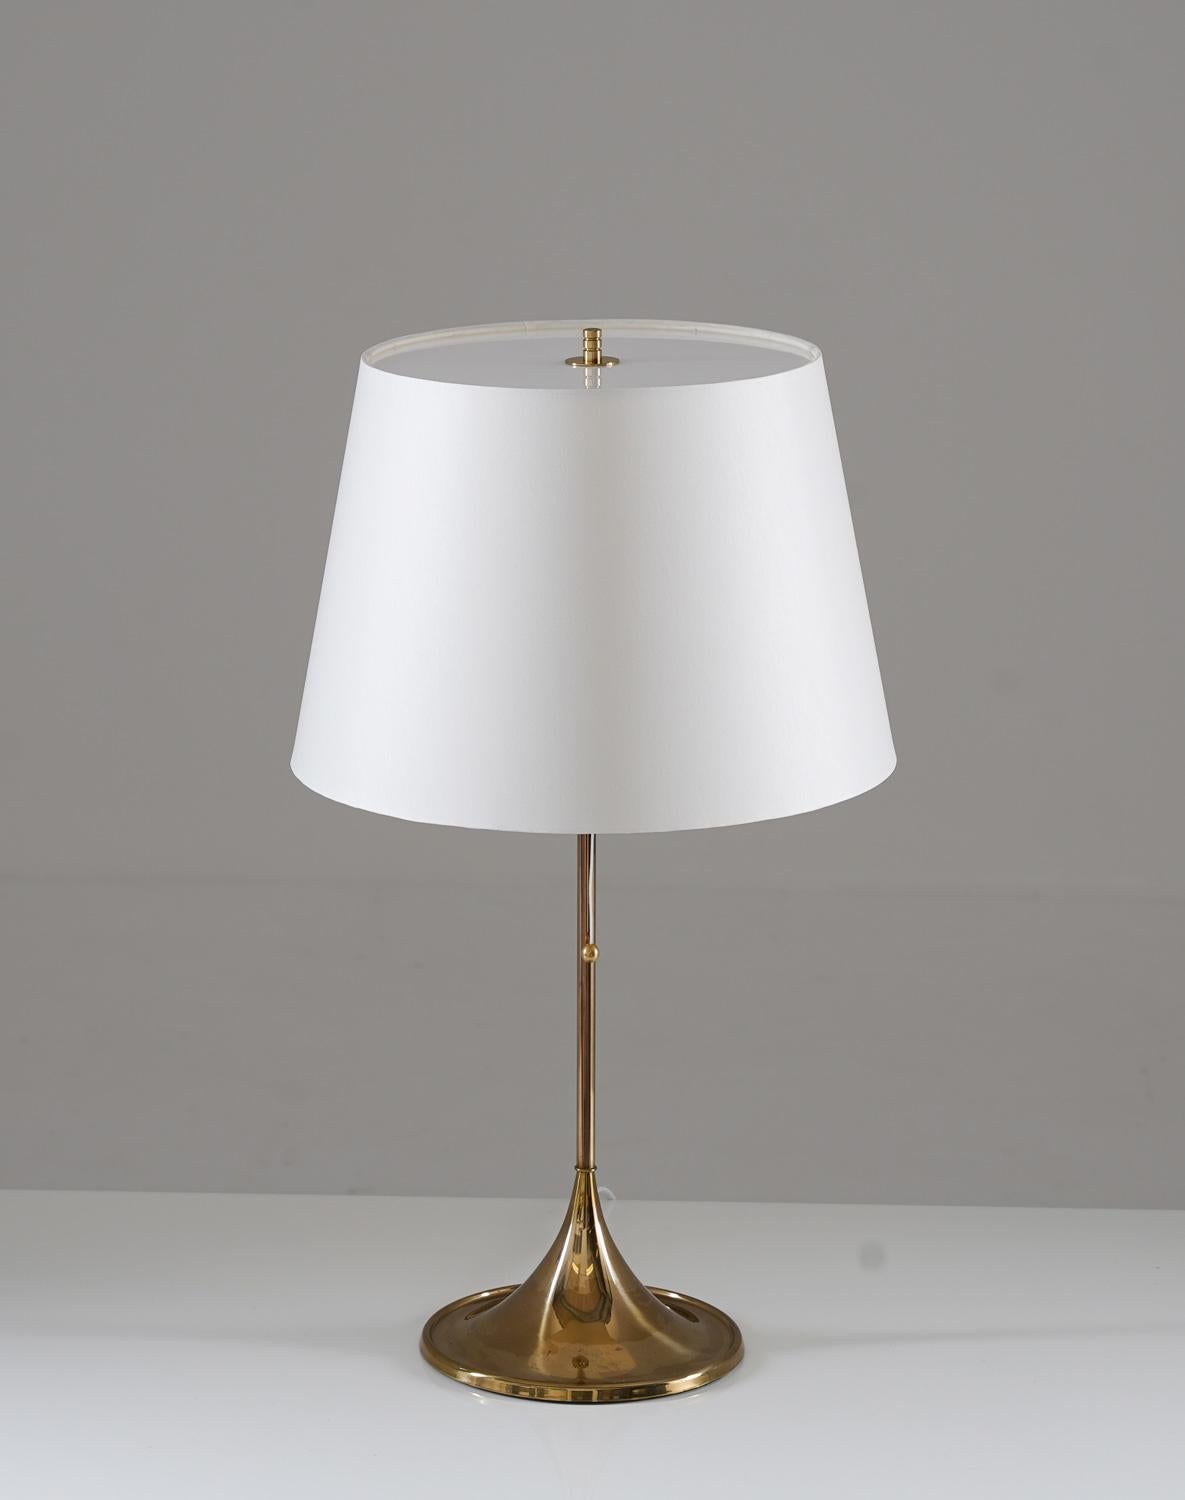 Midcentury table lamps in brass model B-024 by Alf Svensson and Yngvar Sandström for Bergboms, Sweden
The lamps are made of solid brass with a trumpet-shaped foot. The lamps come with original reupholstered shades with a plexi-diffuser on